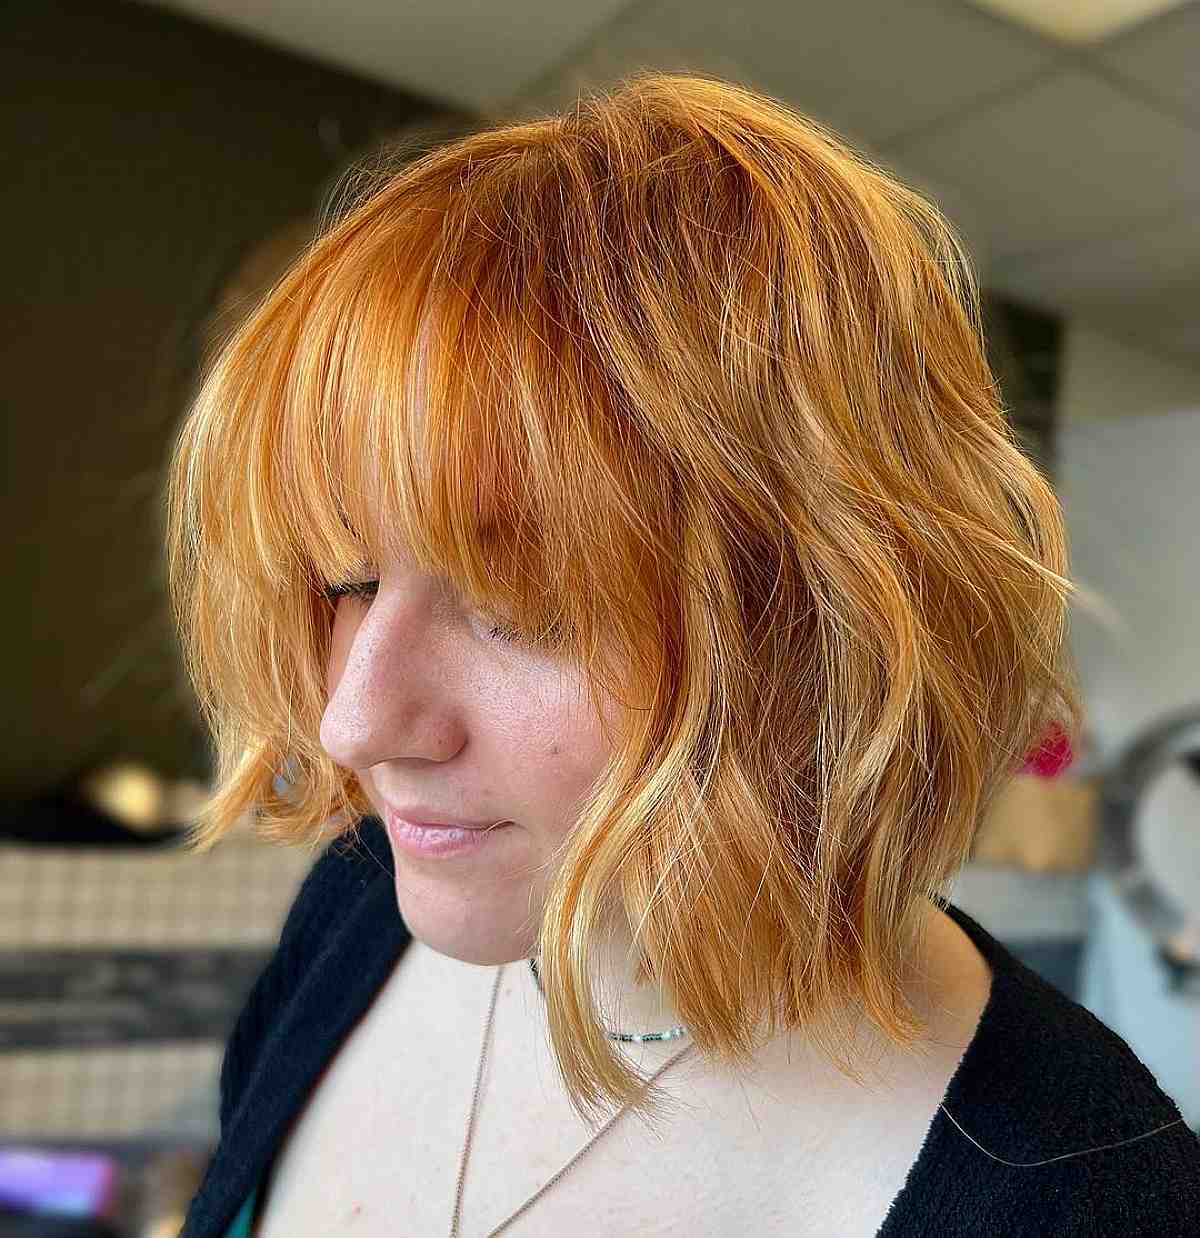 Light Copper on a Textured Choppy Bob with Bangs